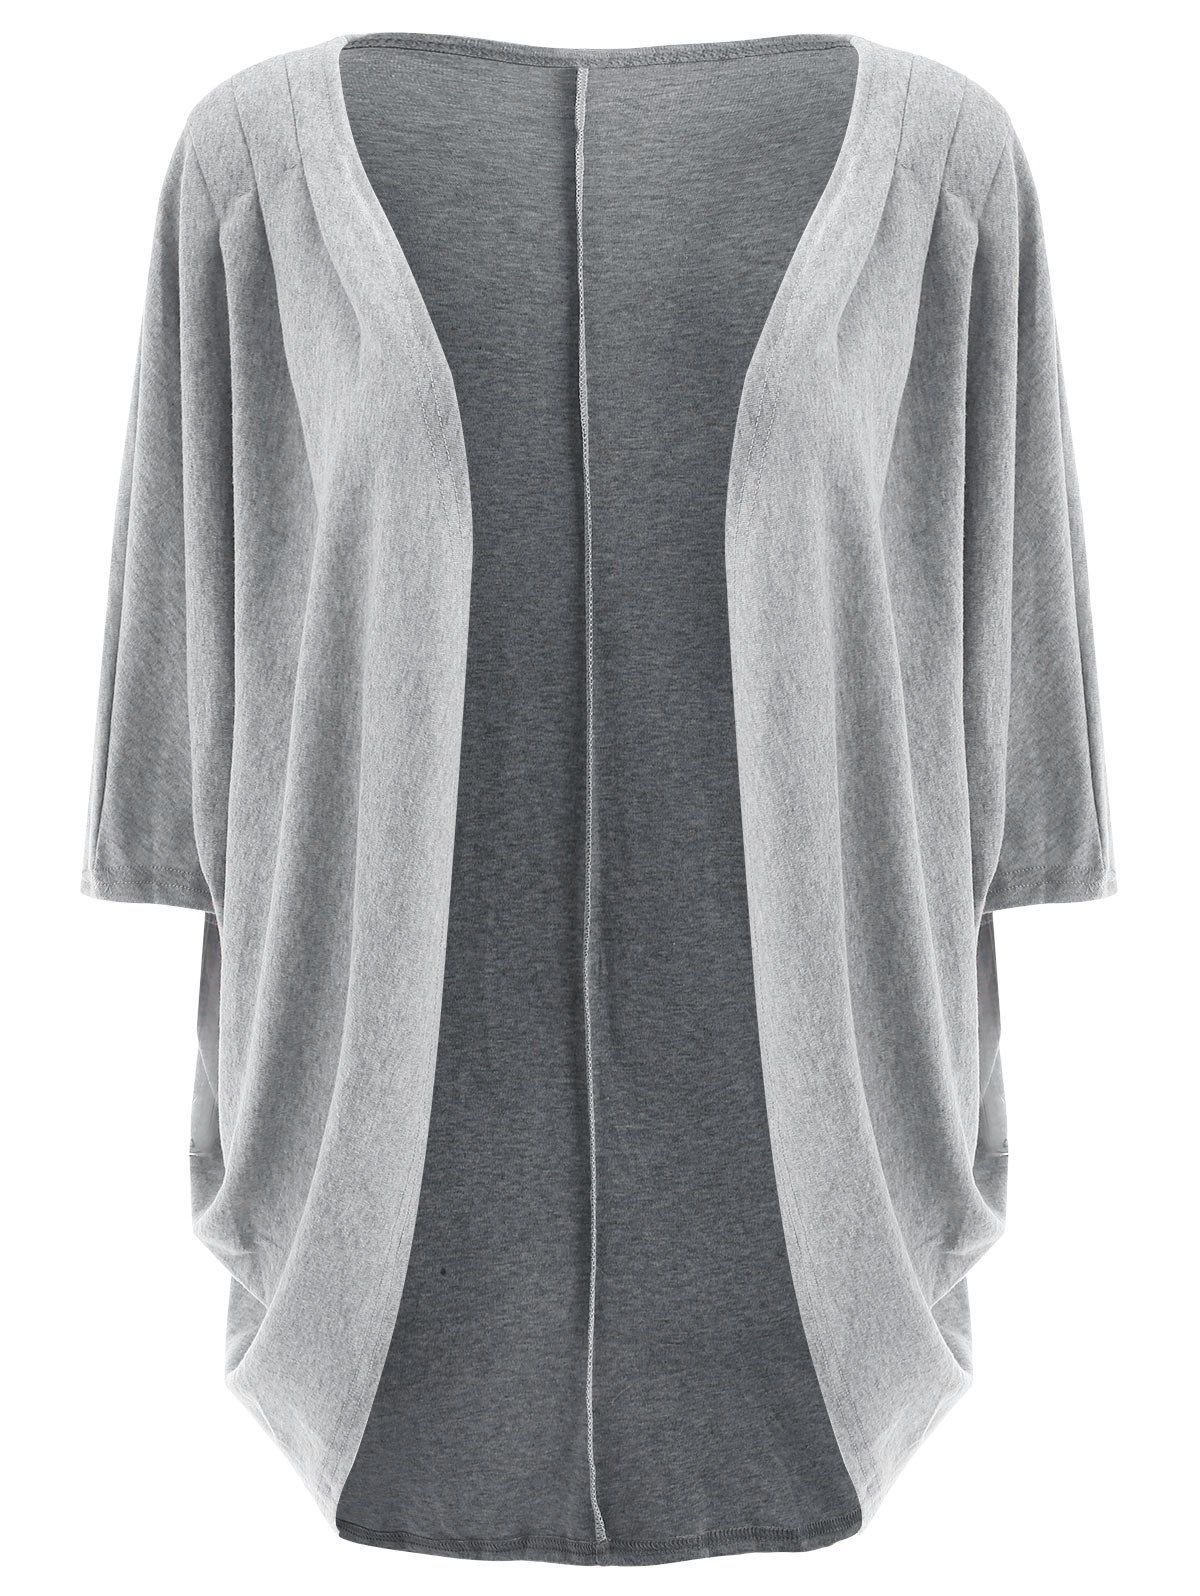 Trendy 3/4 Sleeve Loose Collarless Solid Color Cardigan For Women - GRAY S